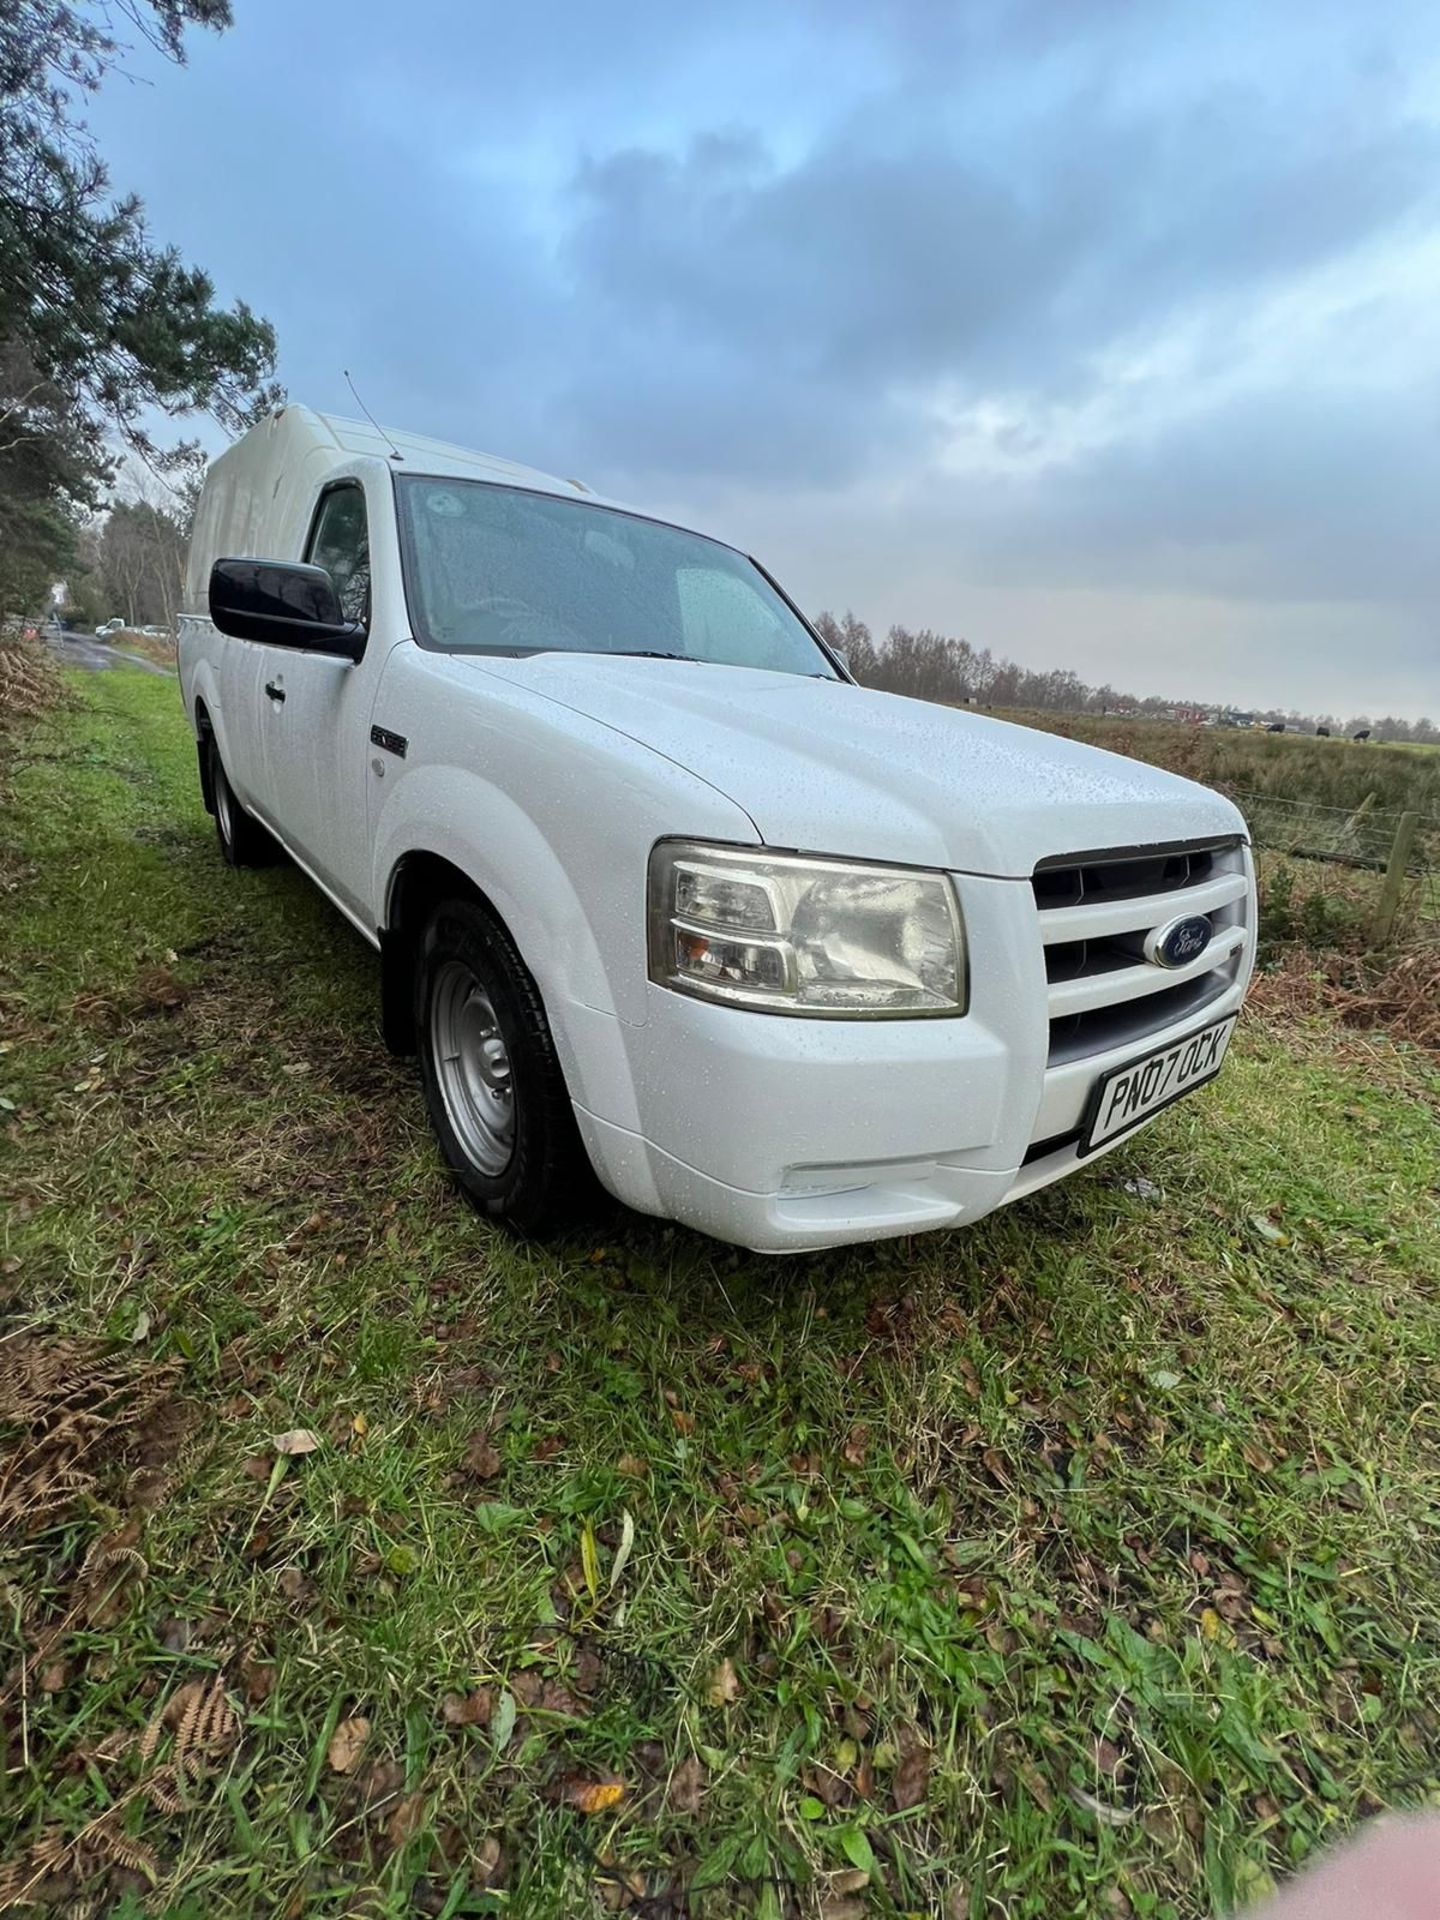 FORD RANGER SINGLE CAB PICKUP TRUCK 2WD EX NHS - Image 4 of 15